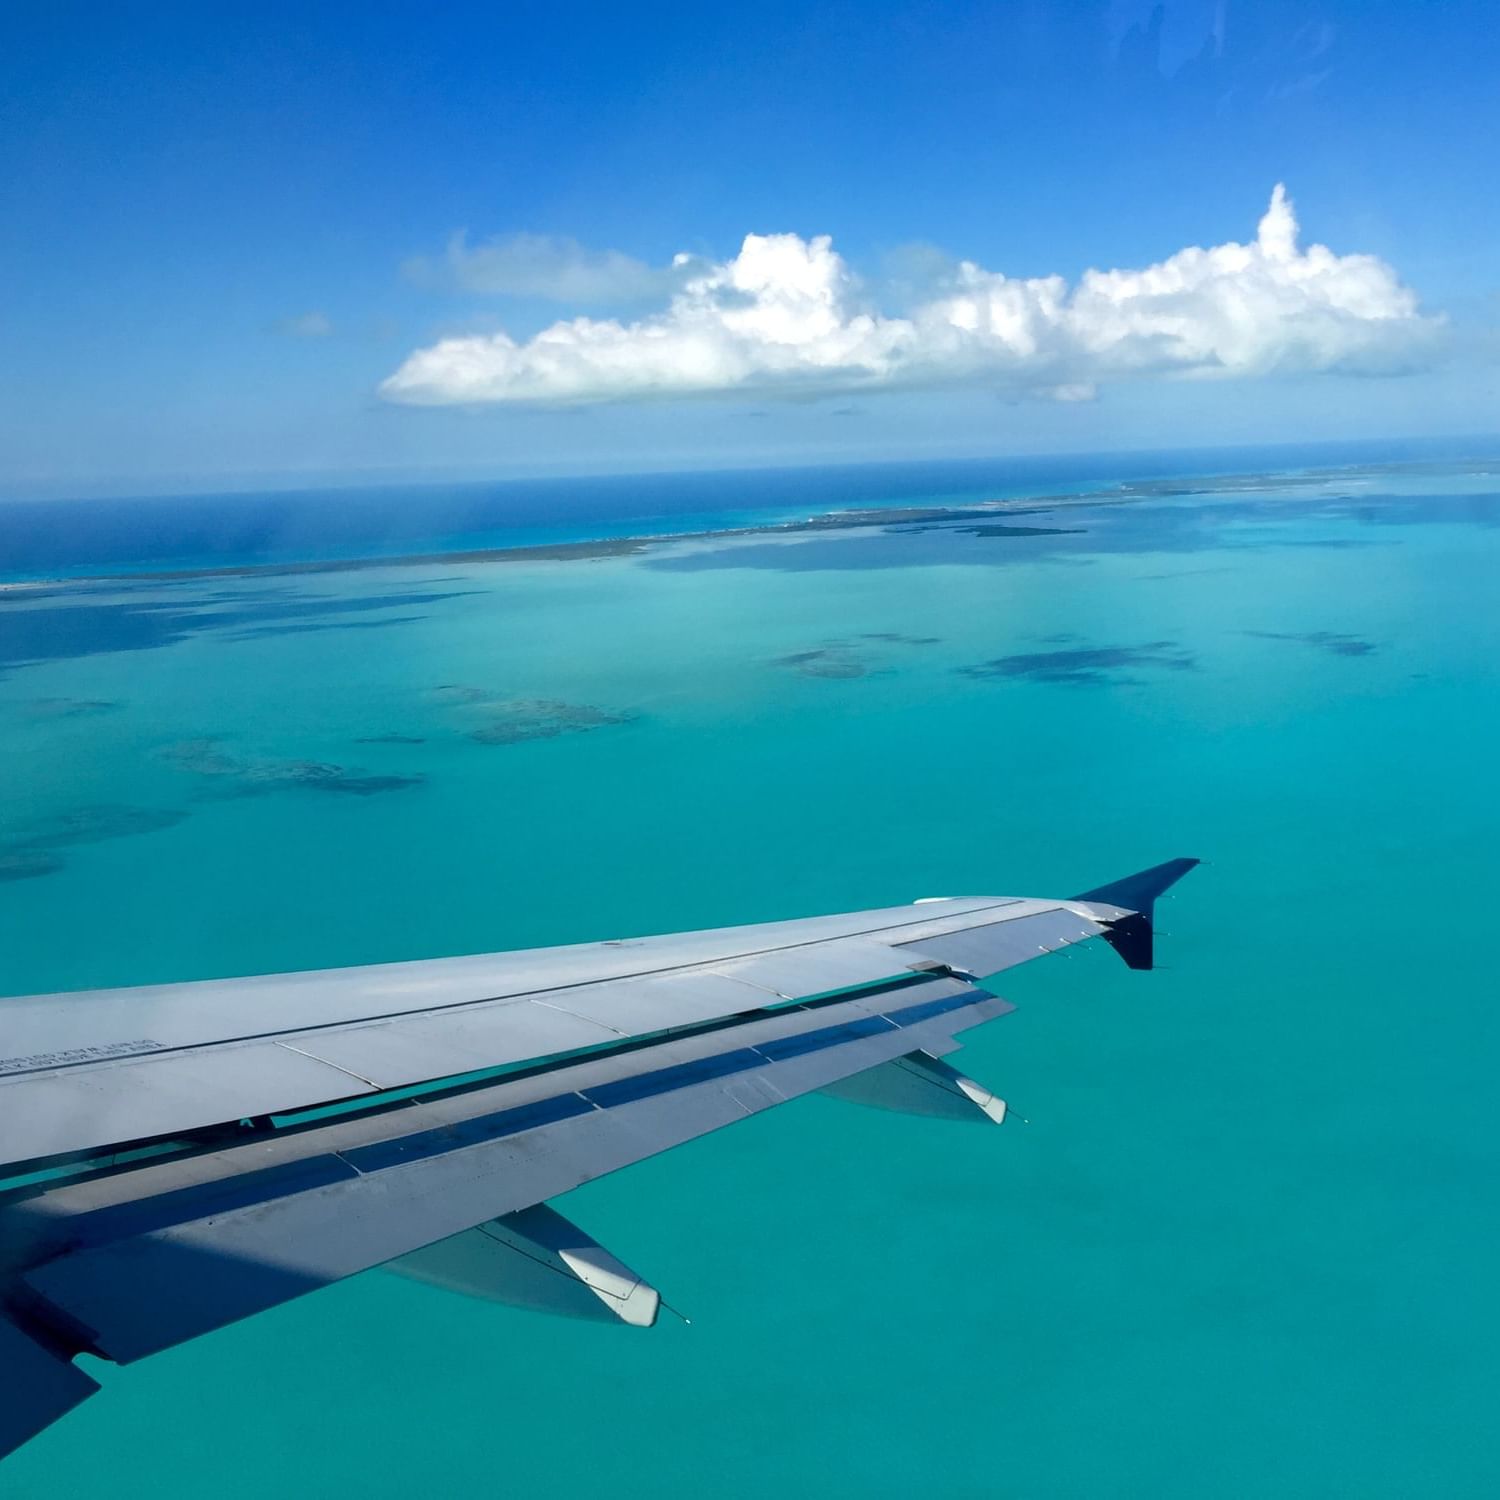 Ocean view from the airplane over the Somerset On Grace Bay